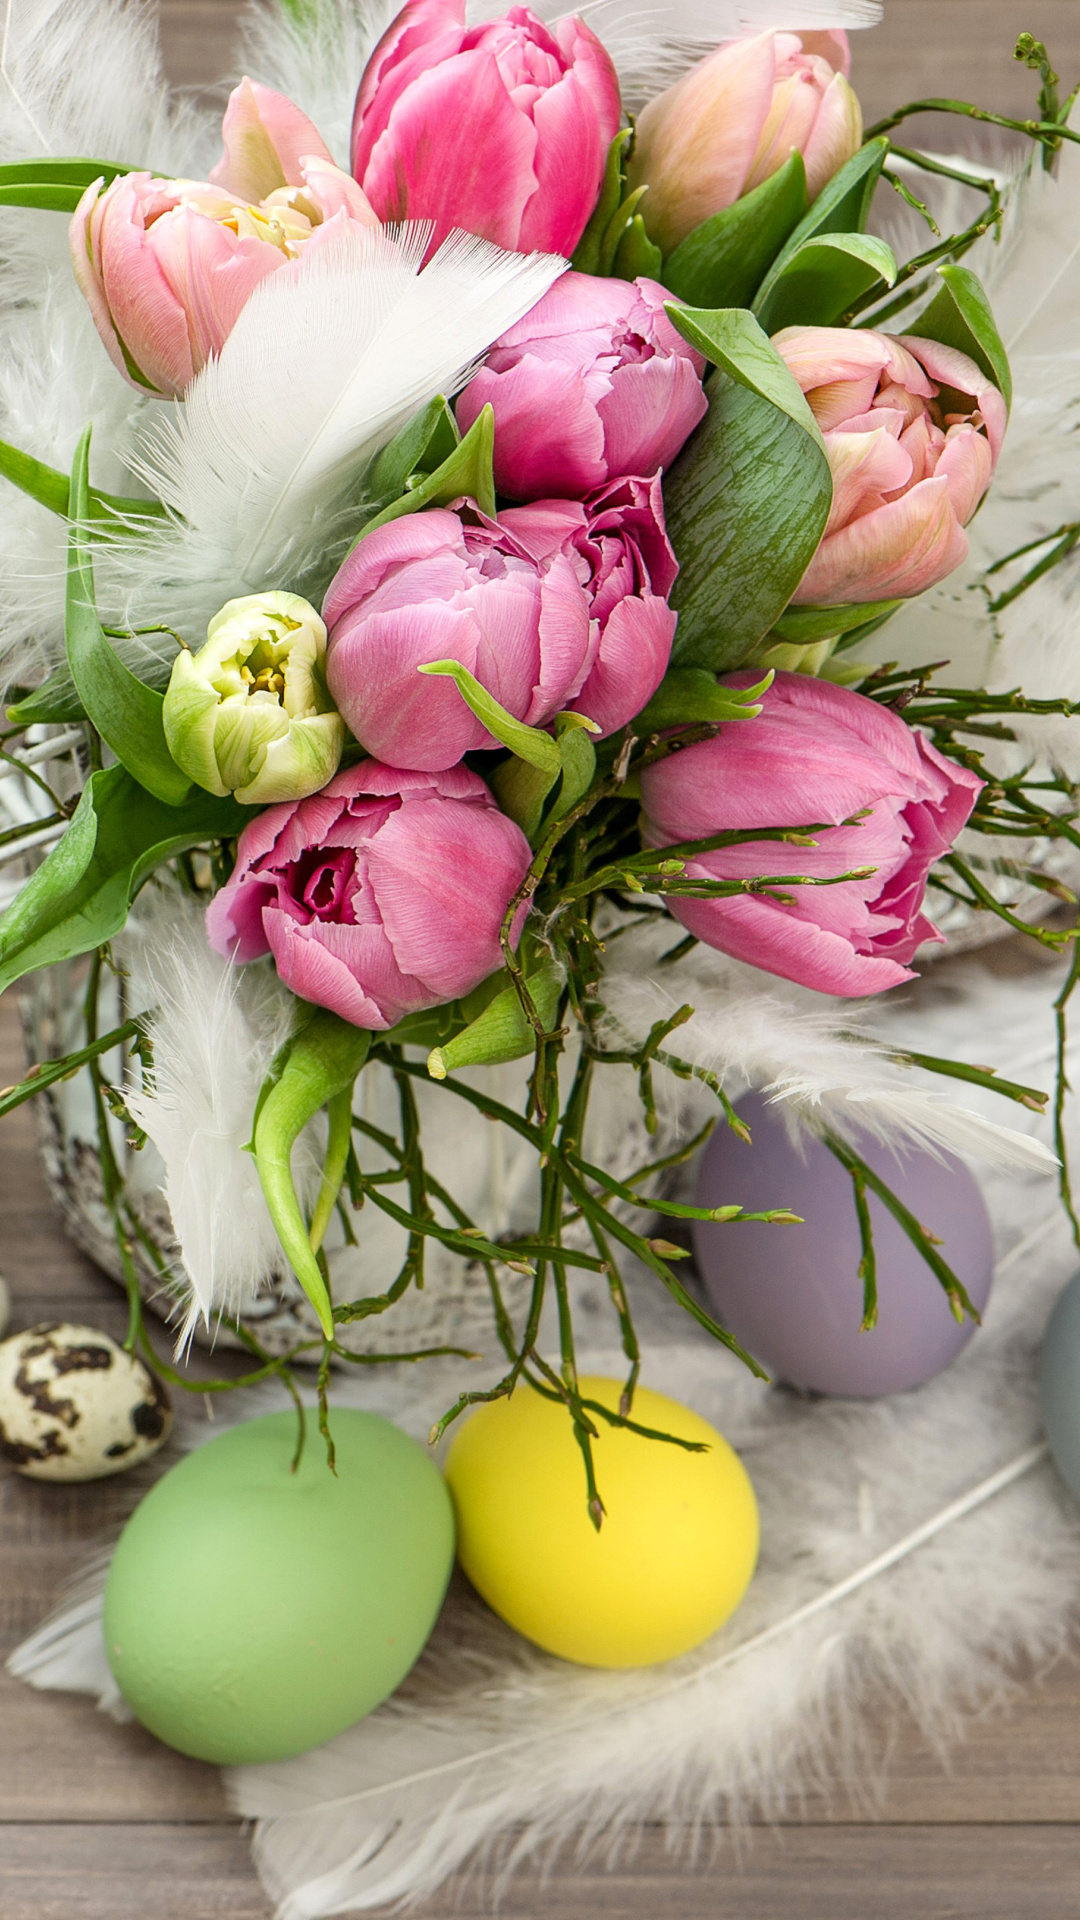 Tulips and Easter Eggs wallpaper 1080x1920